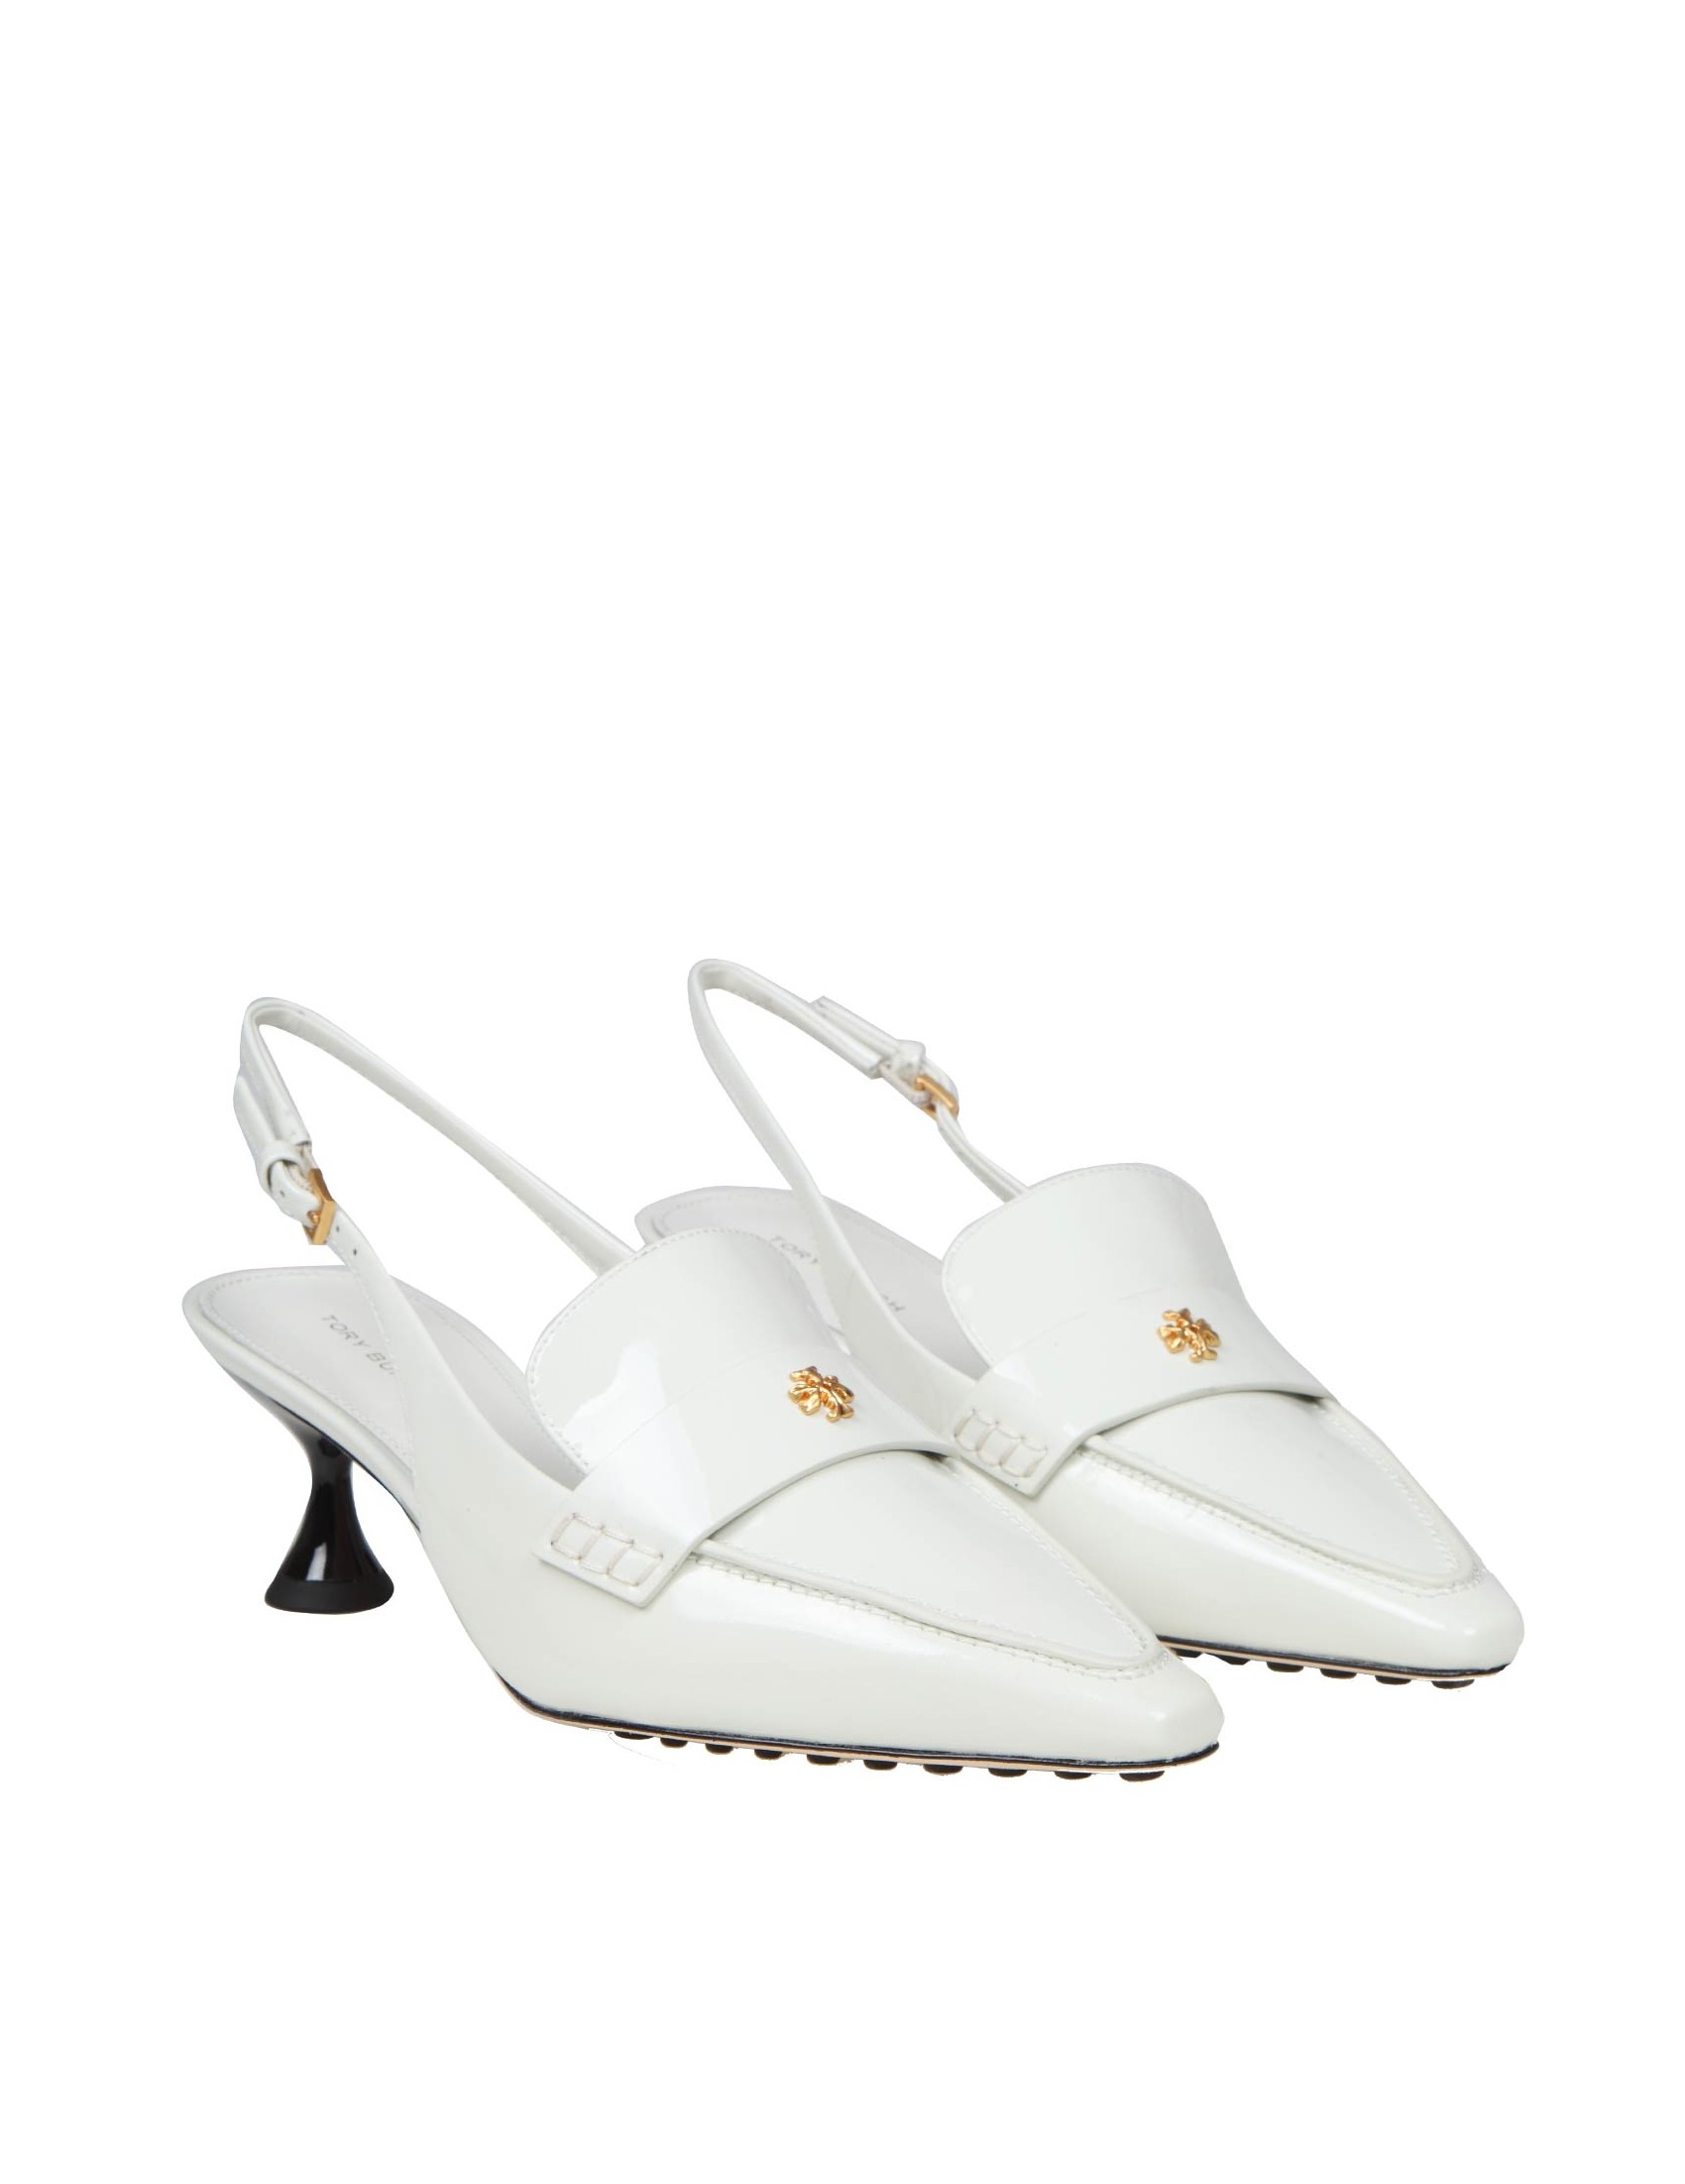 TORY BURCH SLINGBACK IN PEARL COLOR PATENT LEATHER